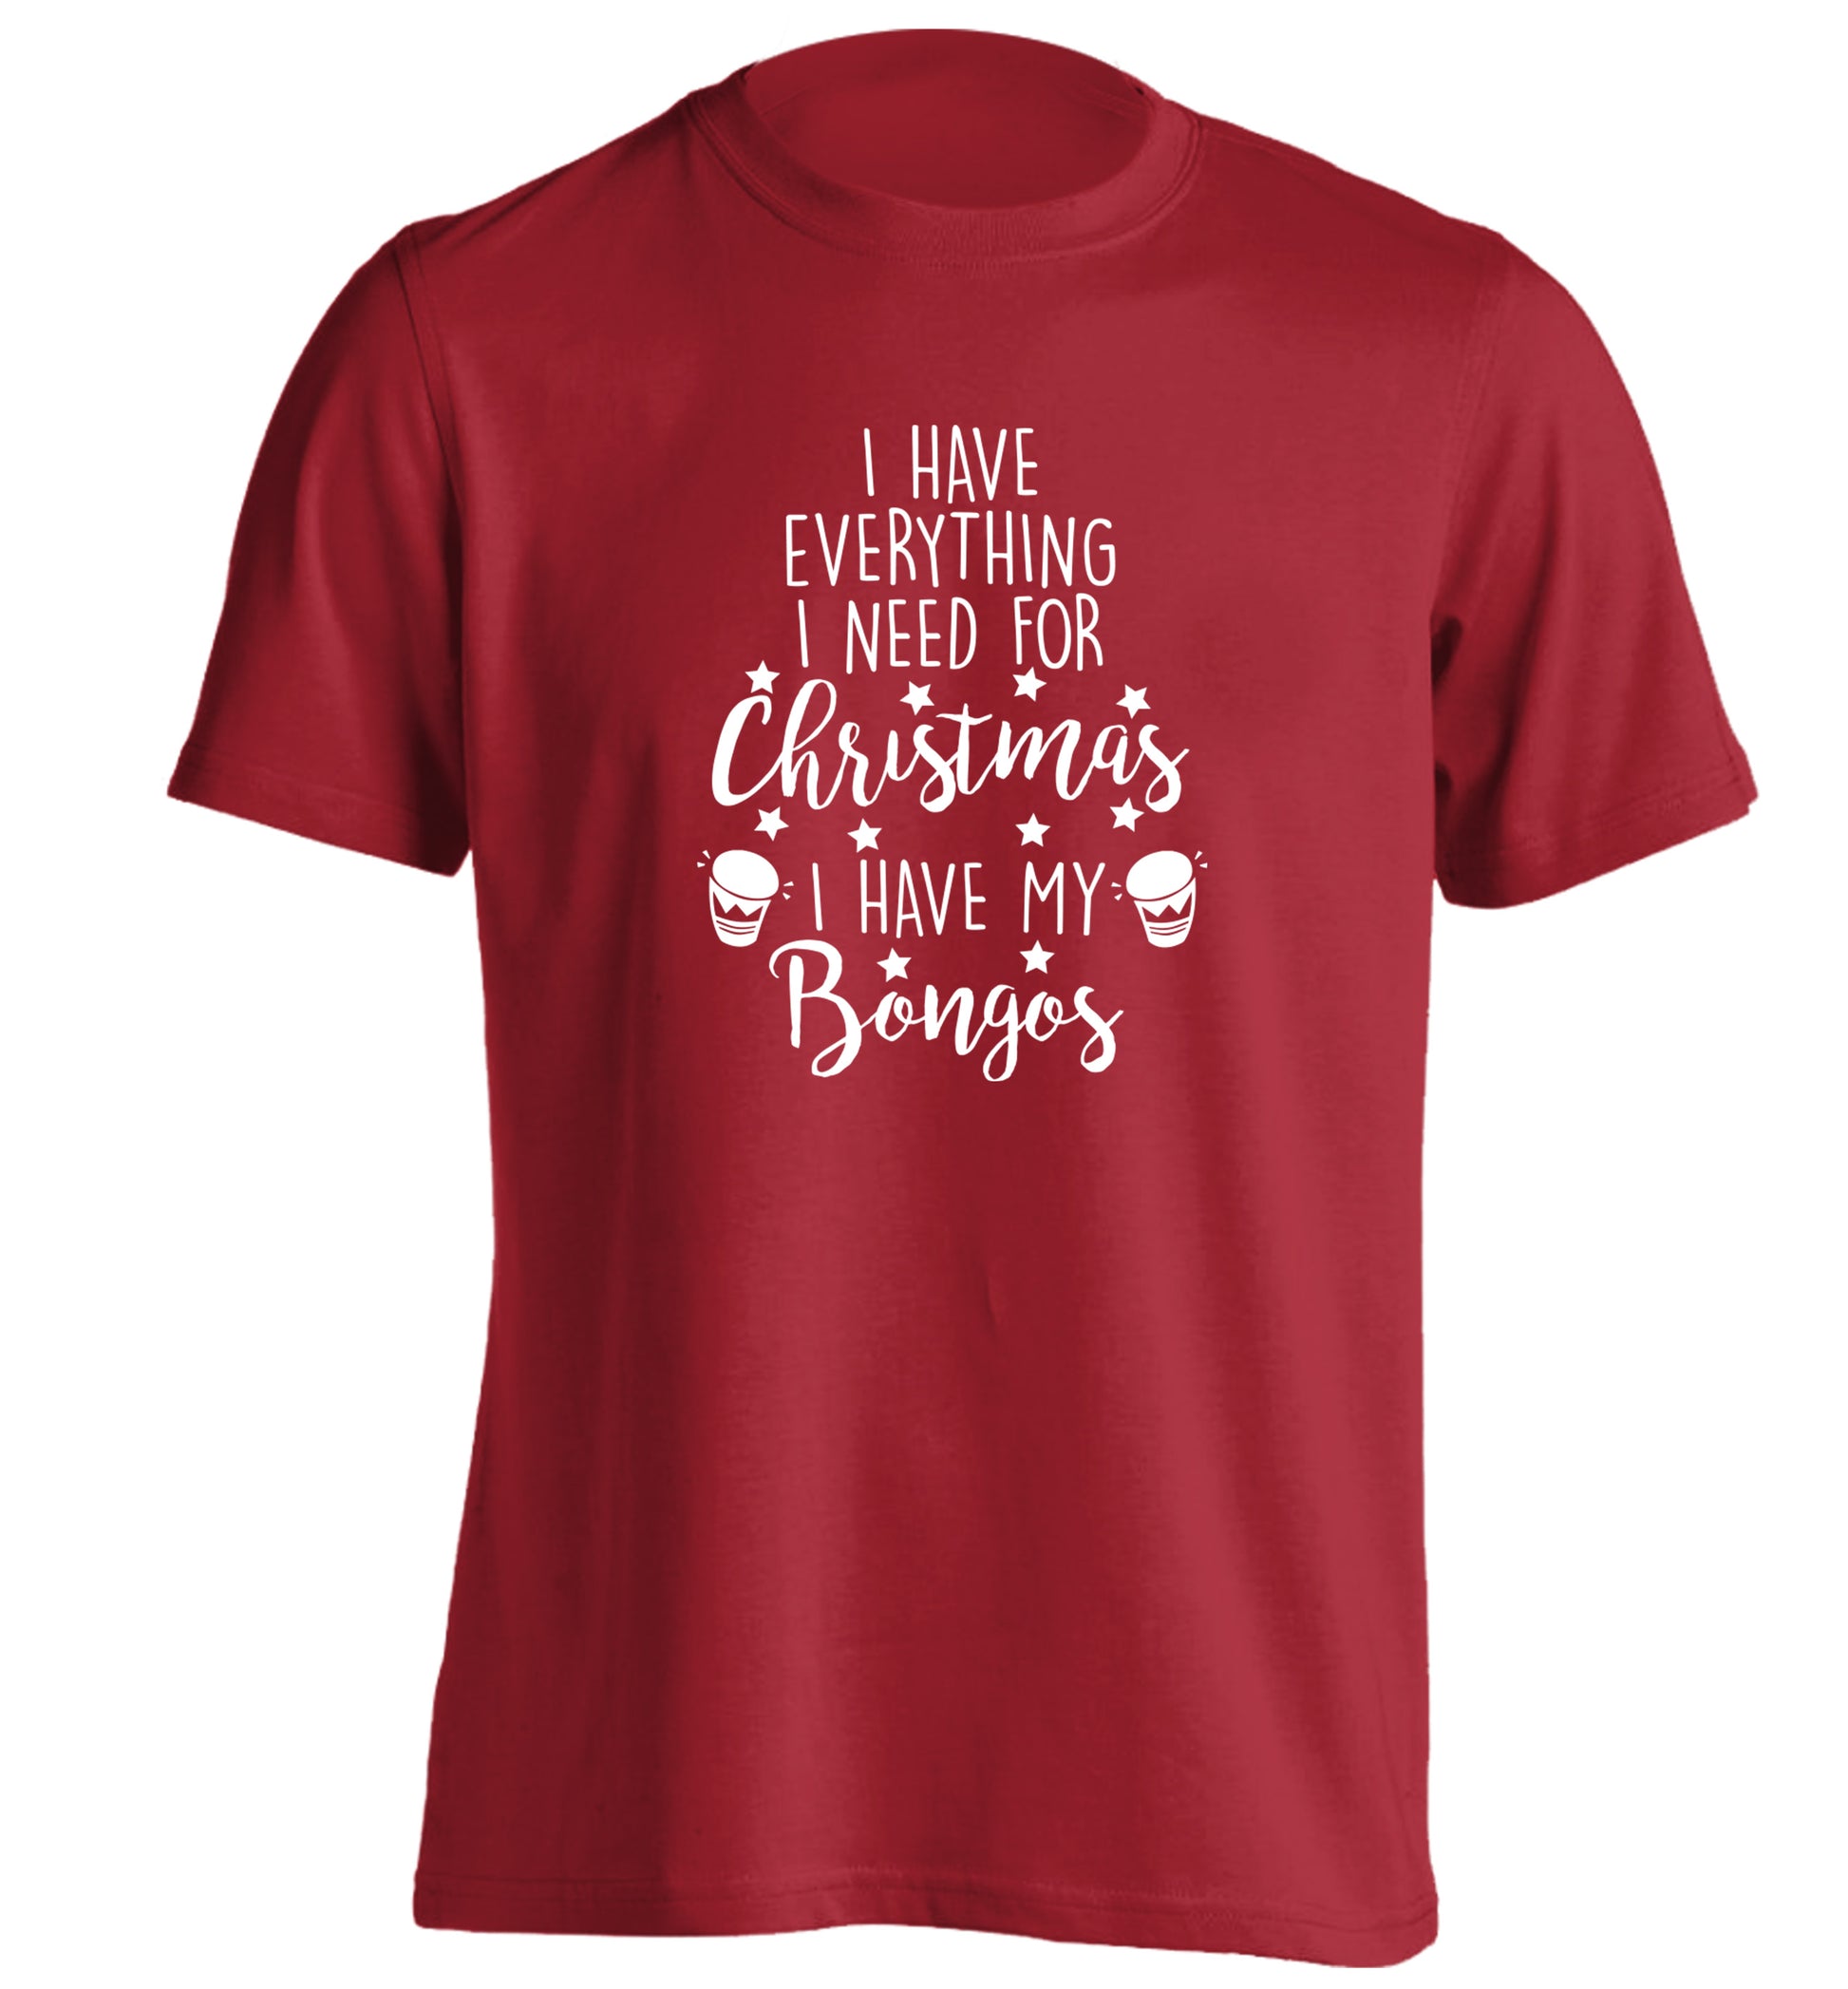 I have everything I need for Christmas I have my bongos! adults unisex red Tshirt 2XL